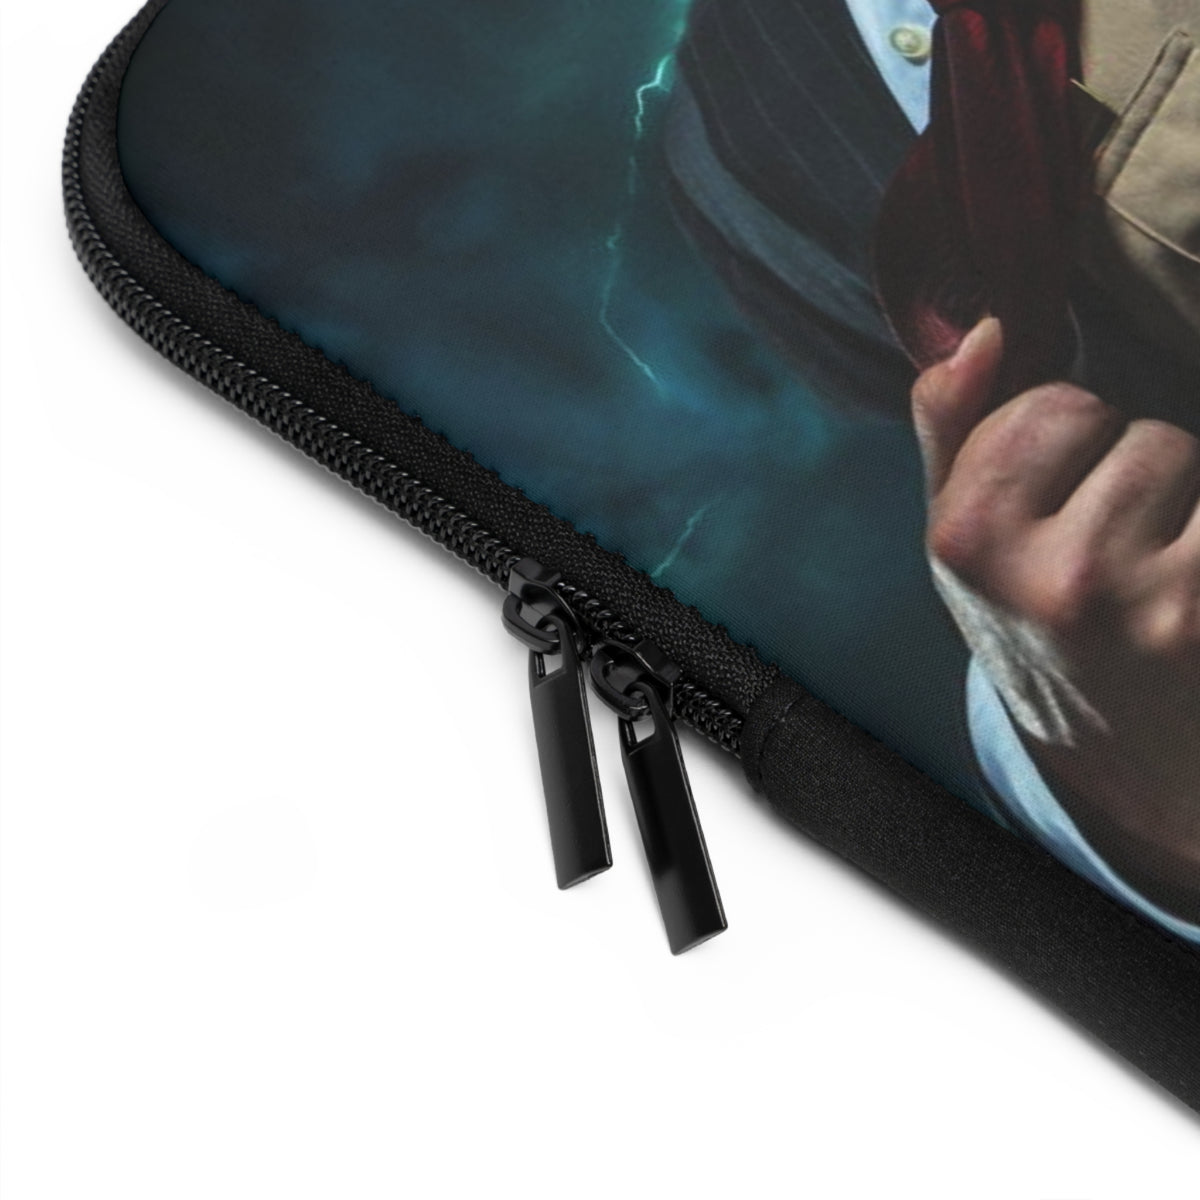 Answering the Call Sheriff Laptop Sleeve